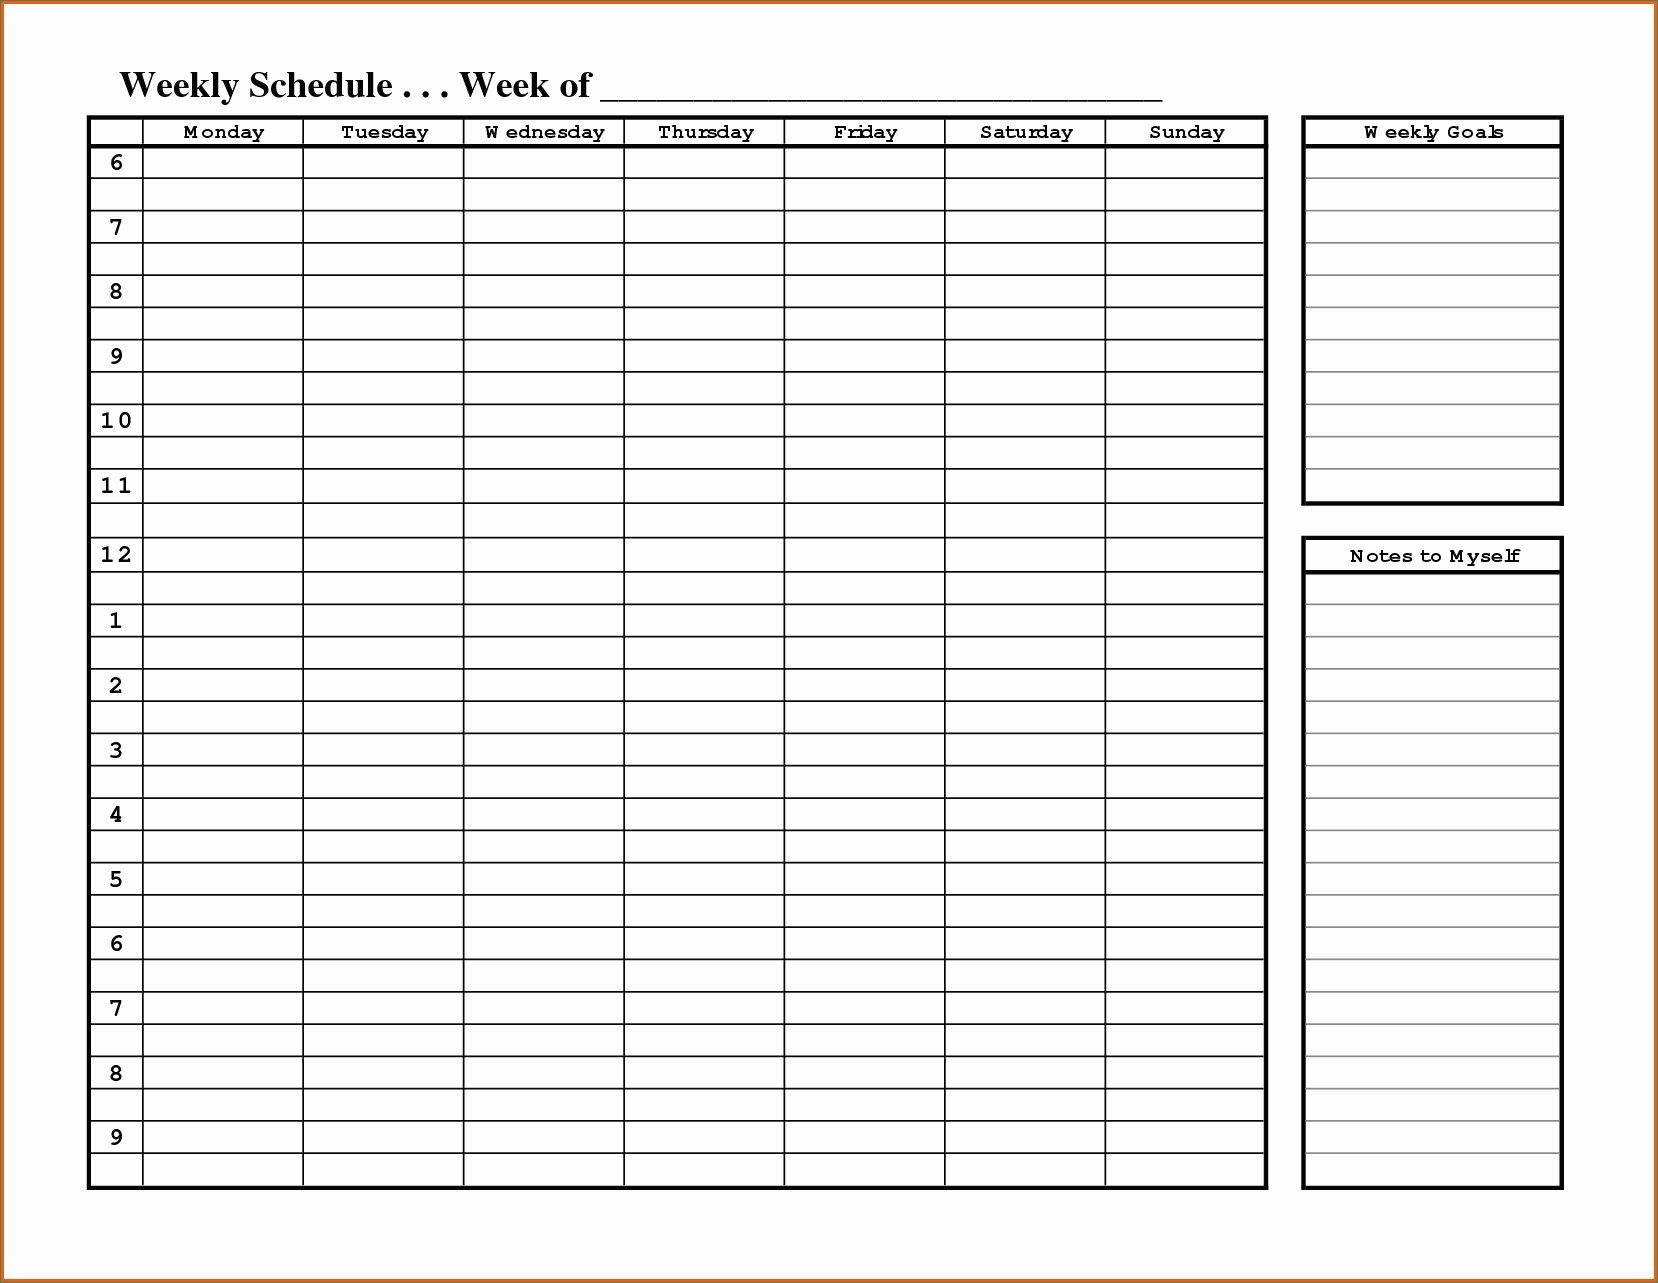 Weekday Schedule With Time Slots - Calendar Inspiration Design